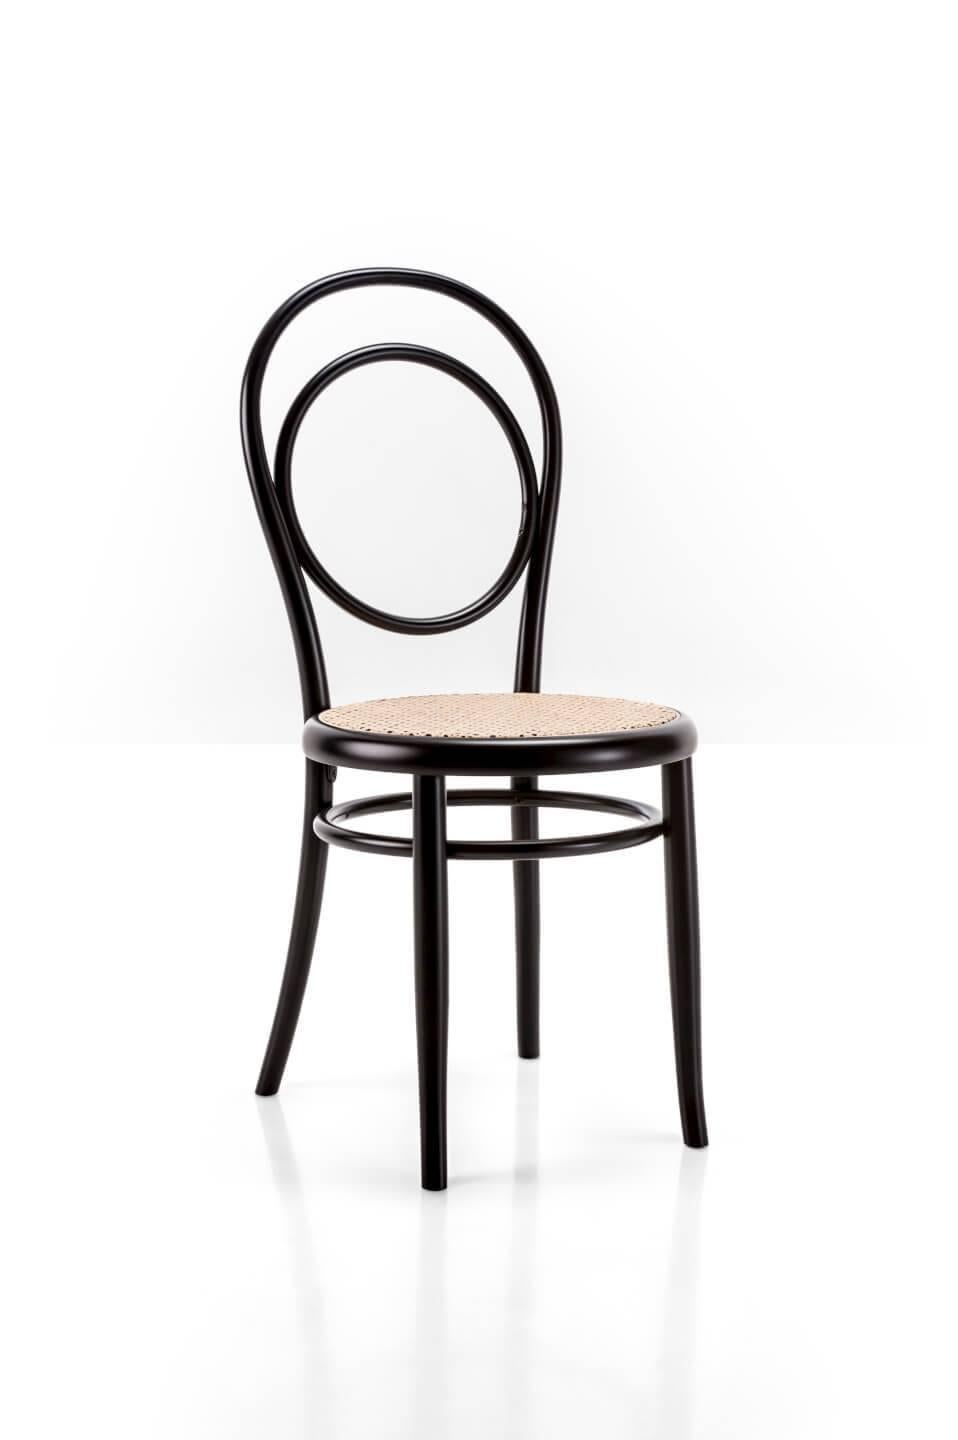 The great Classic. The item that is absolutely the most famous and most sold in the history of furniture. Designed by Michael Thonet in 1860, the No. 14 chair immediately became known as the bistro chair. Minimalist both in the chosen material and